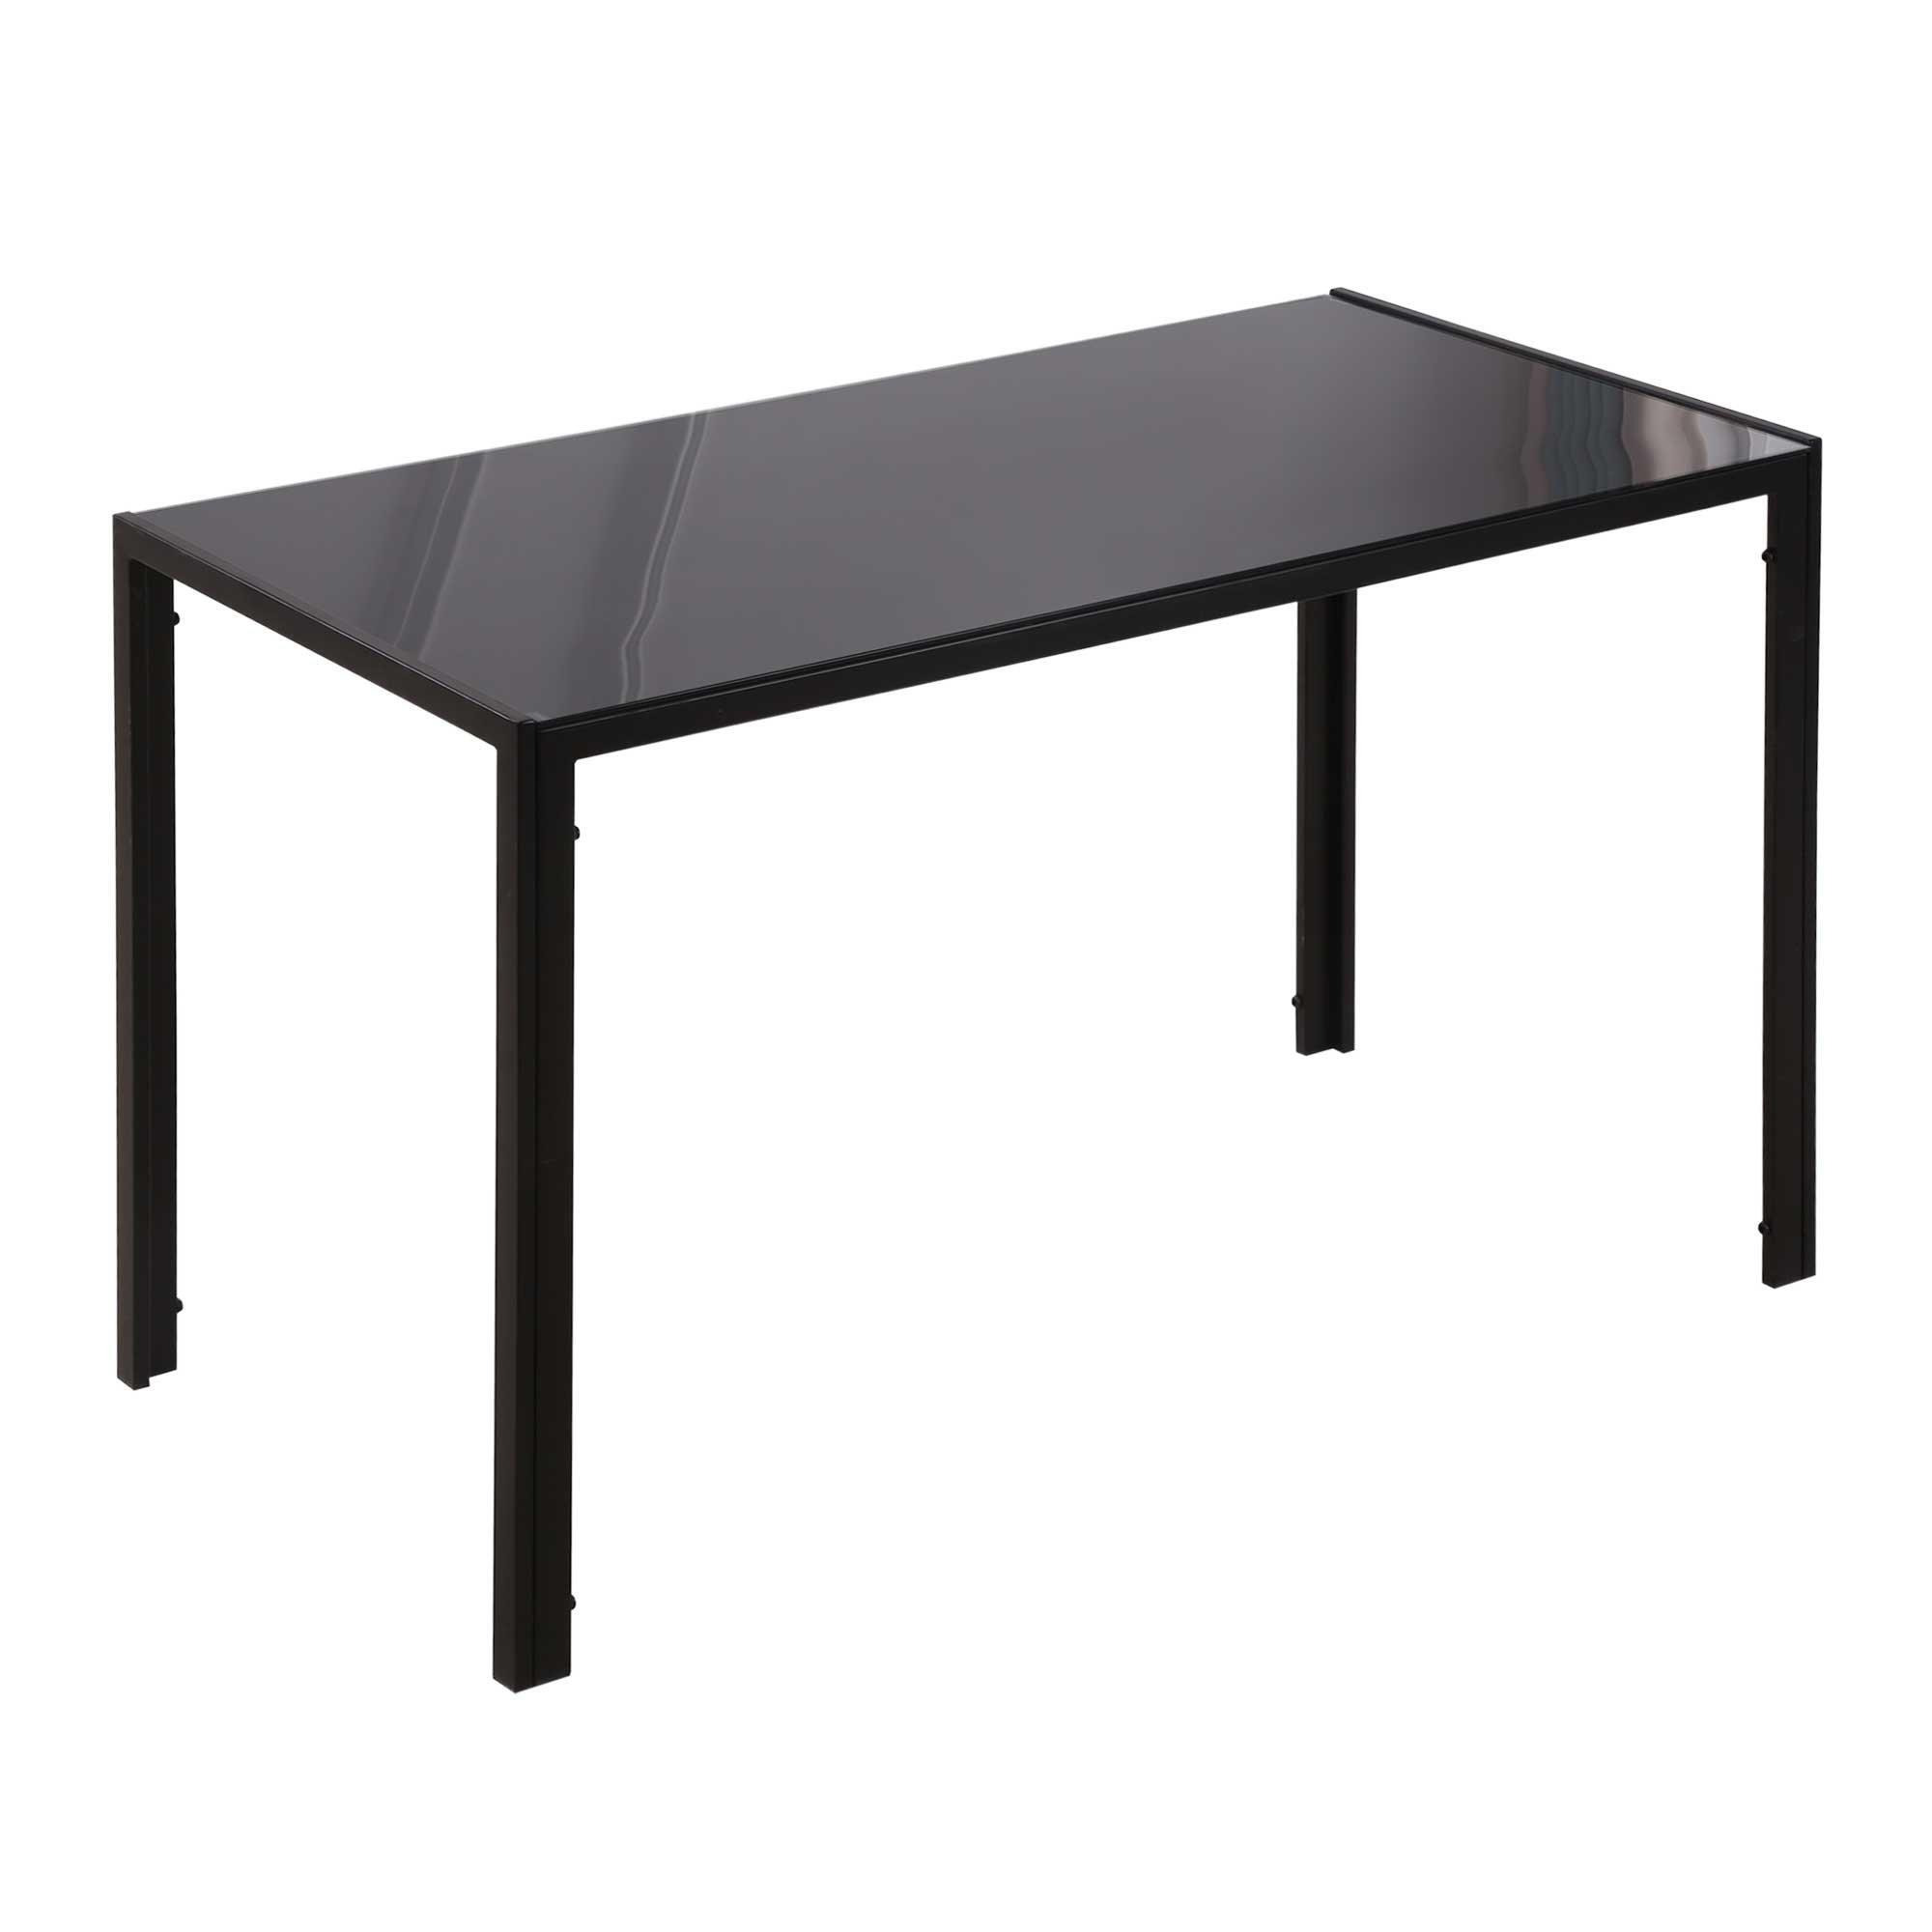 Modern Rectangular 4 Seater Dining Table with Tempered Glass Top - image 1